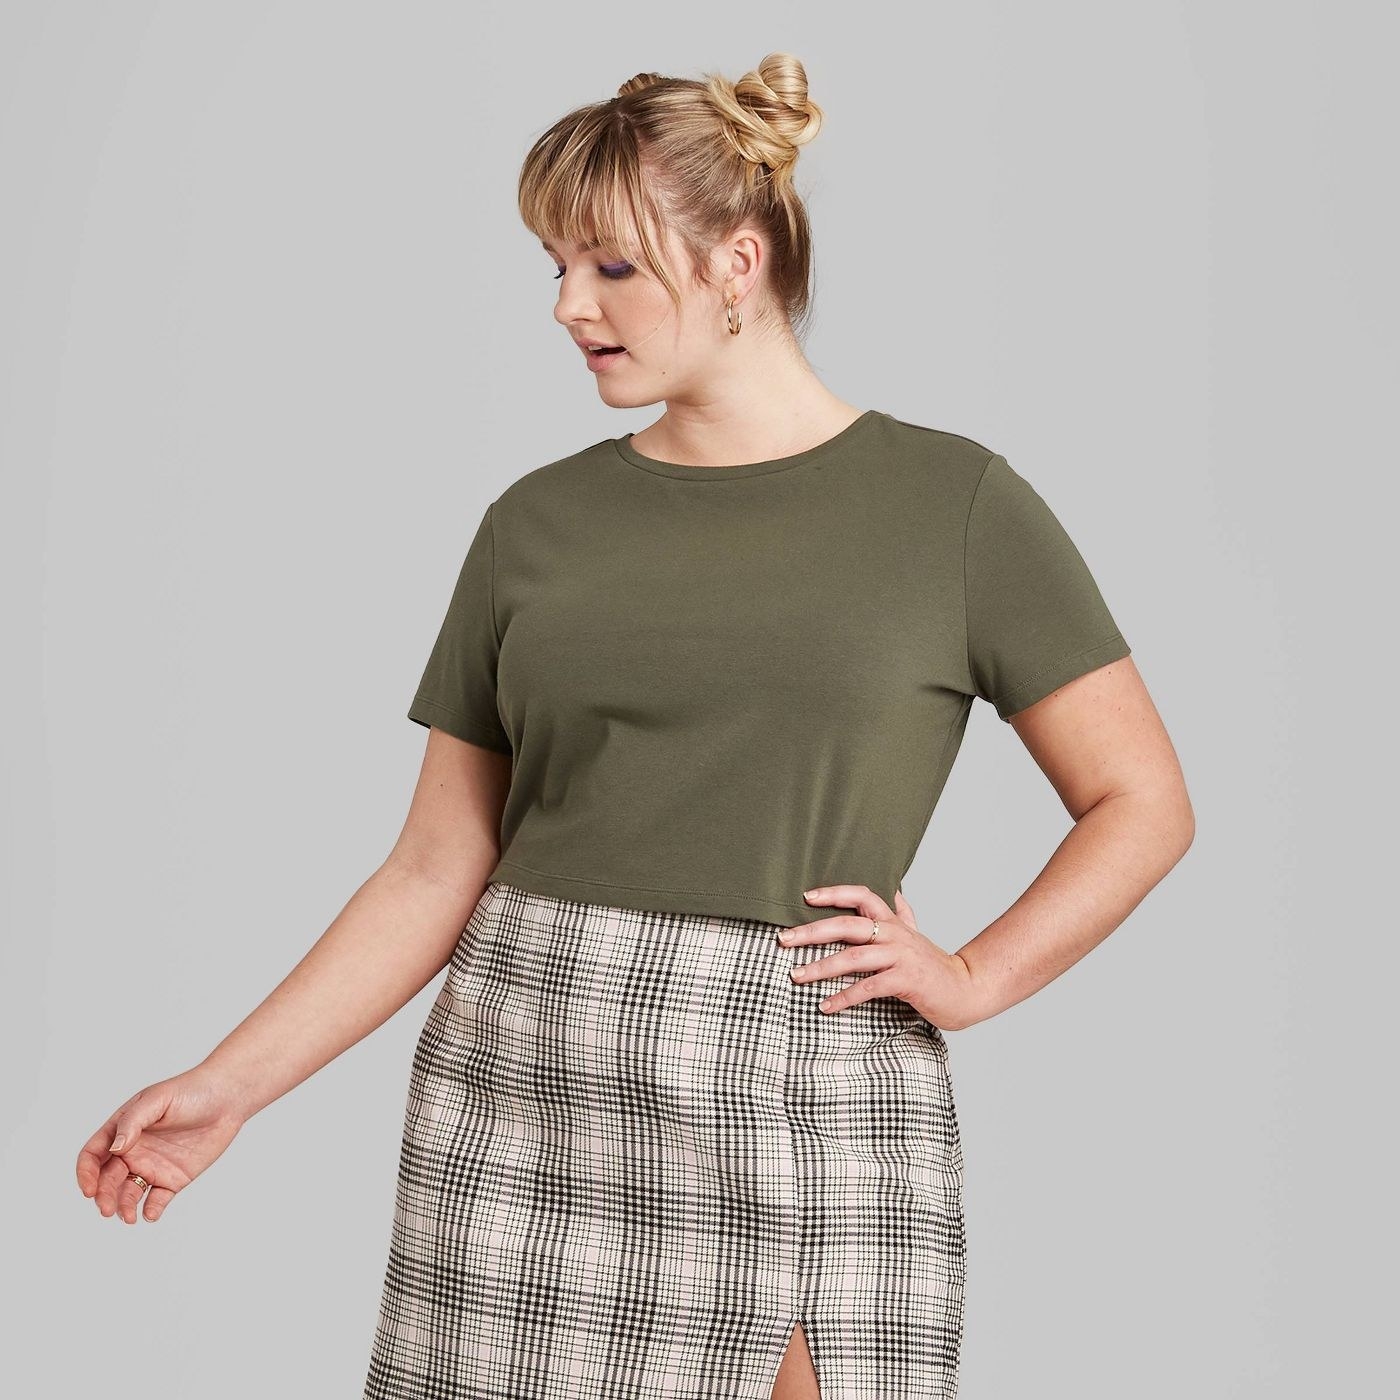 Model wearing the olive cropped t-shir